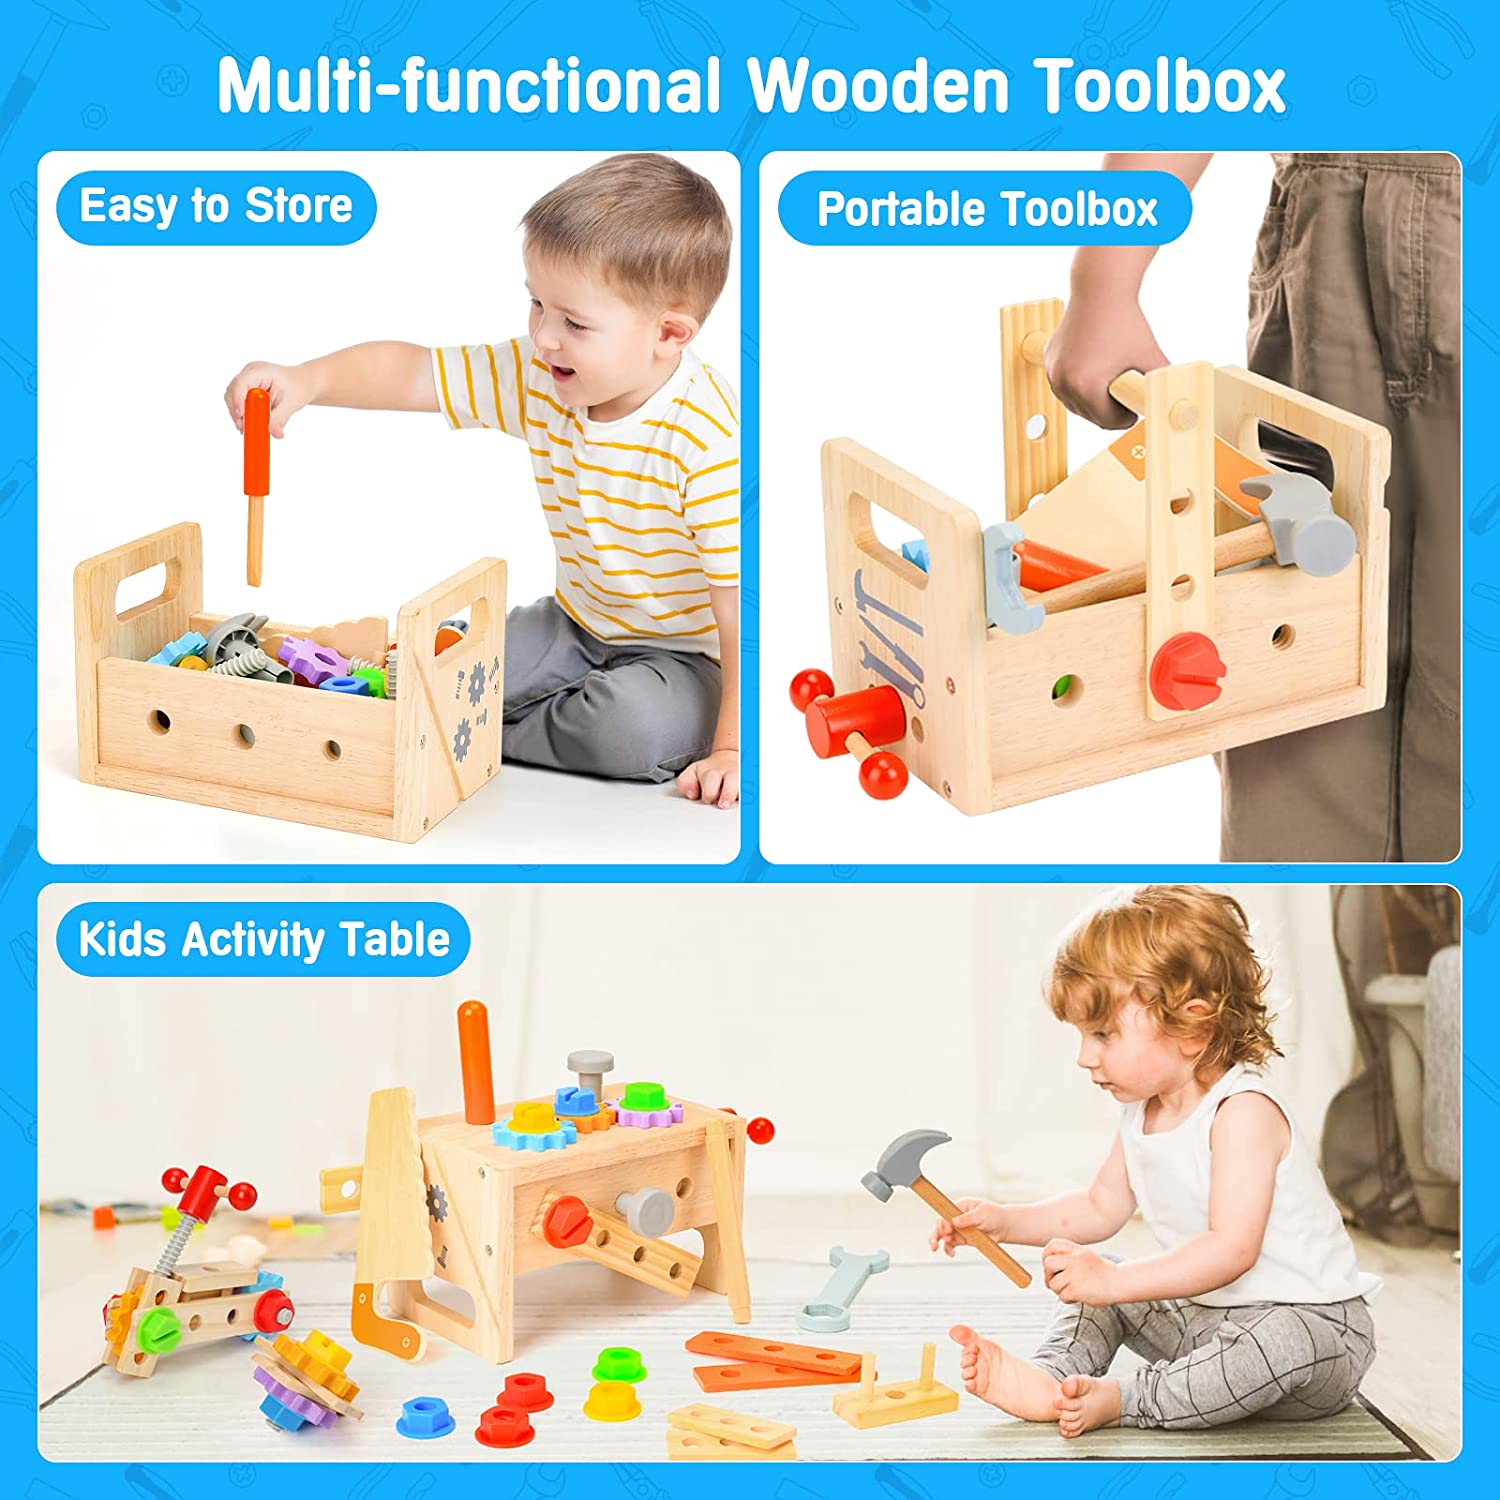 Wooden Tool Set for Kids 2 3 4 5 Year Old, 29Pcs Educational STEM Toys Toddler Toys for 2 Year Old Construction Preschool Learning Activities Gifts for Boys Girls Age 2-4 1-3